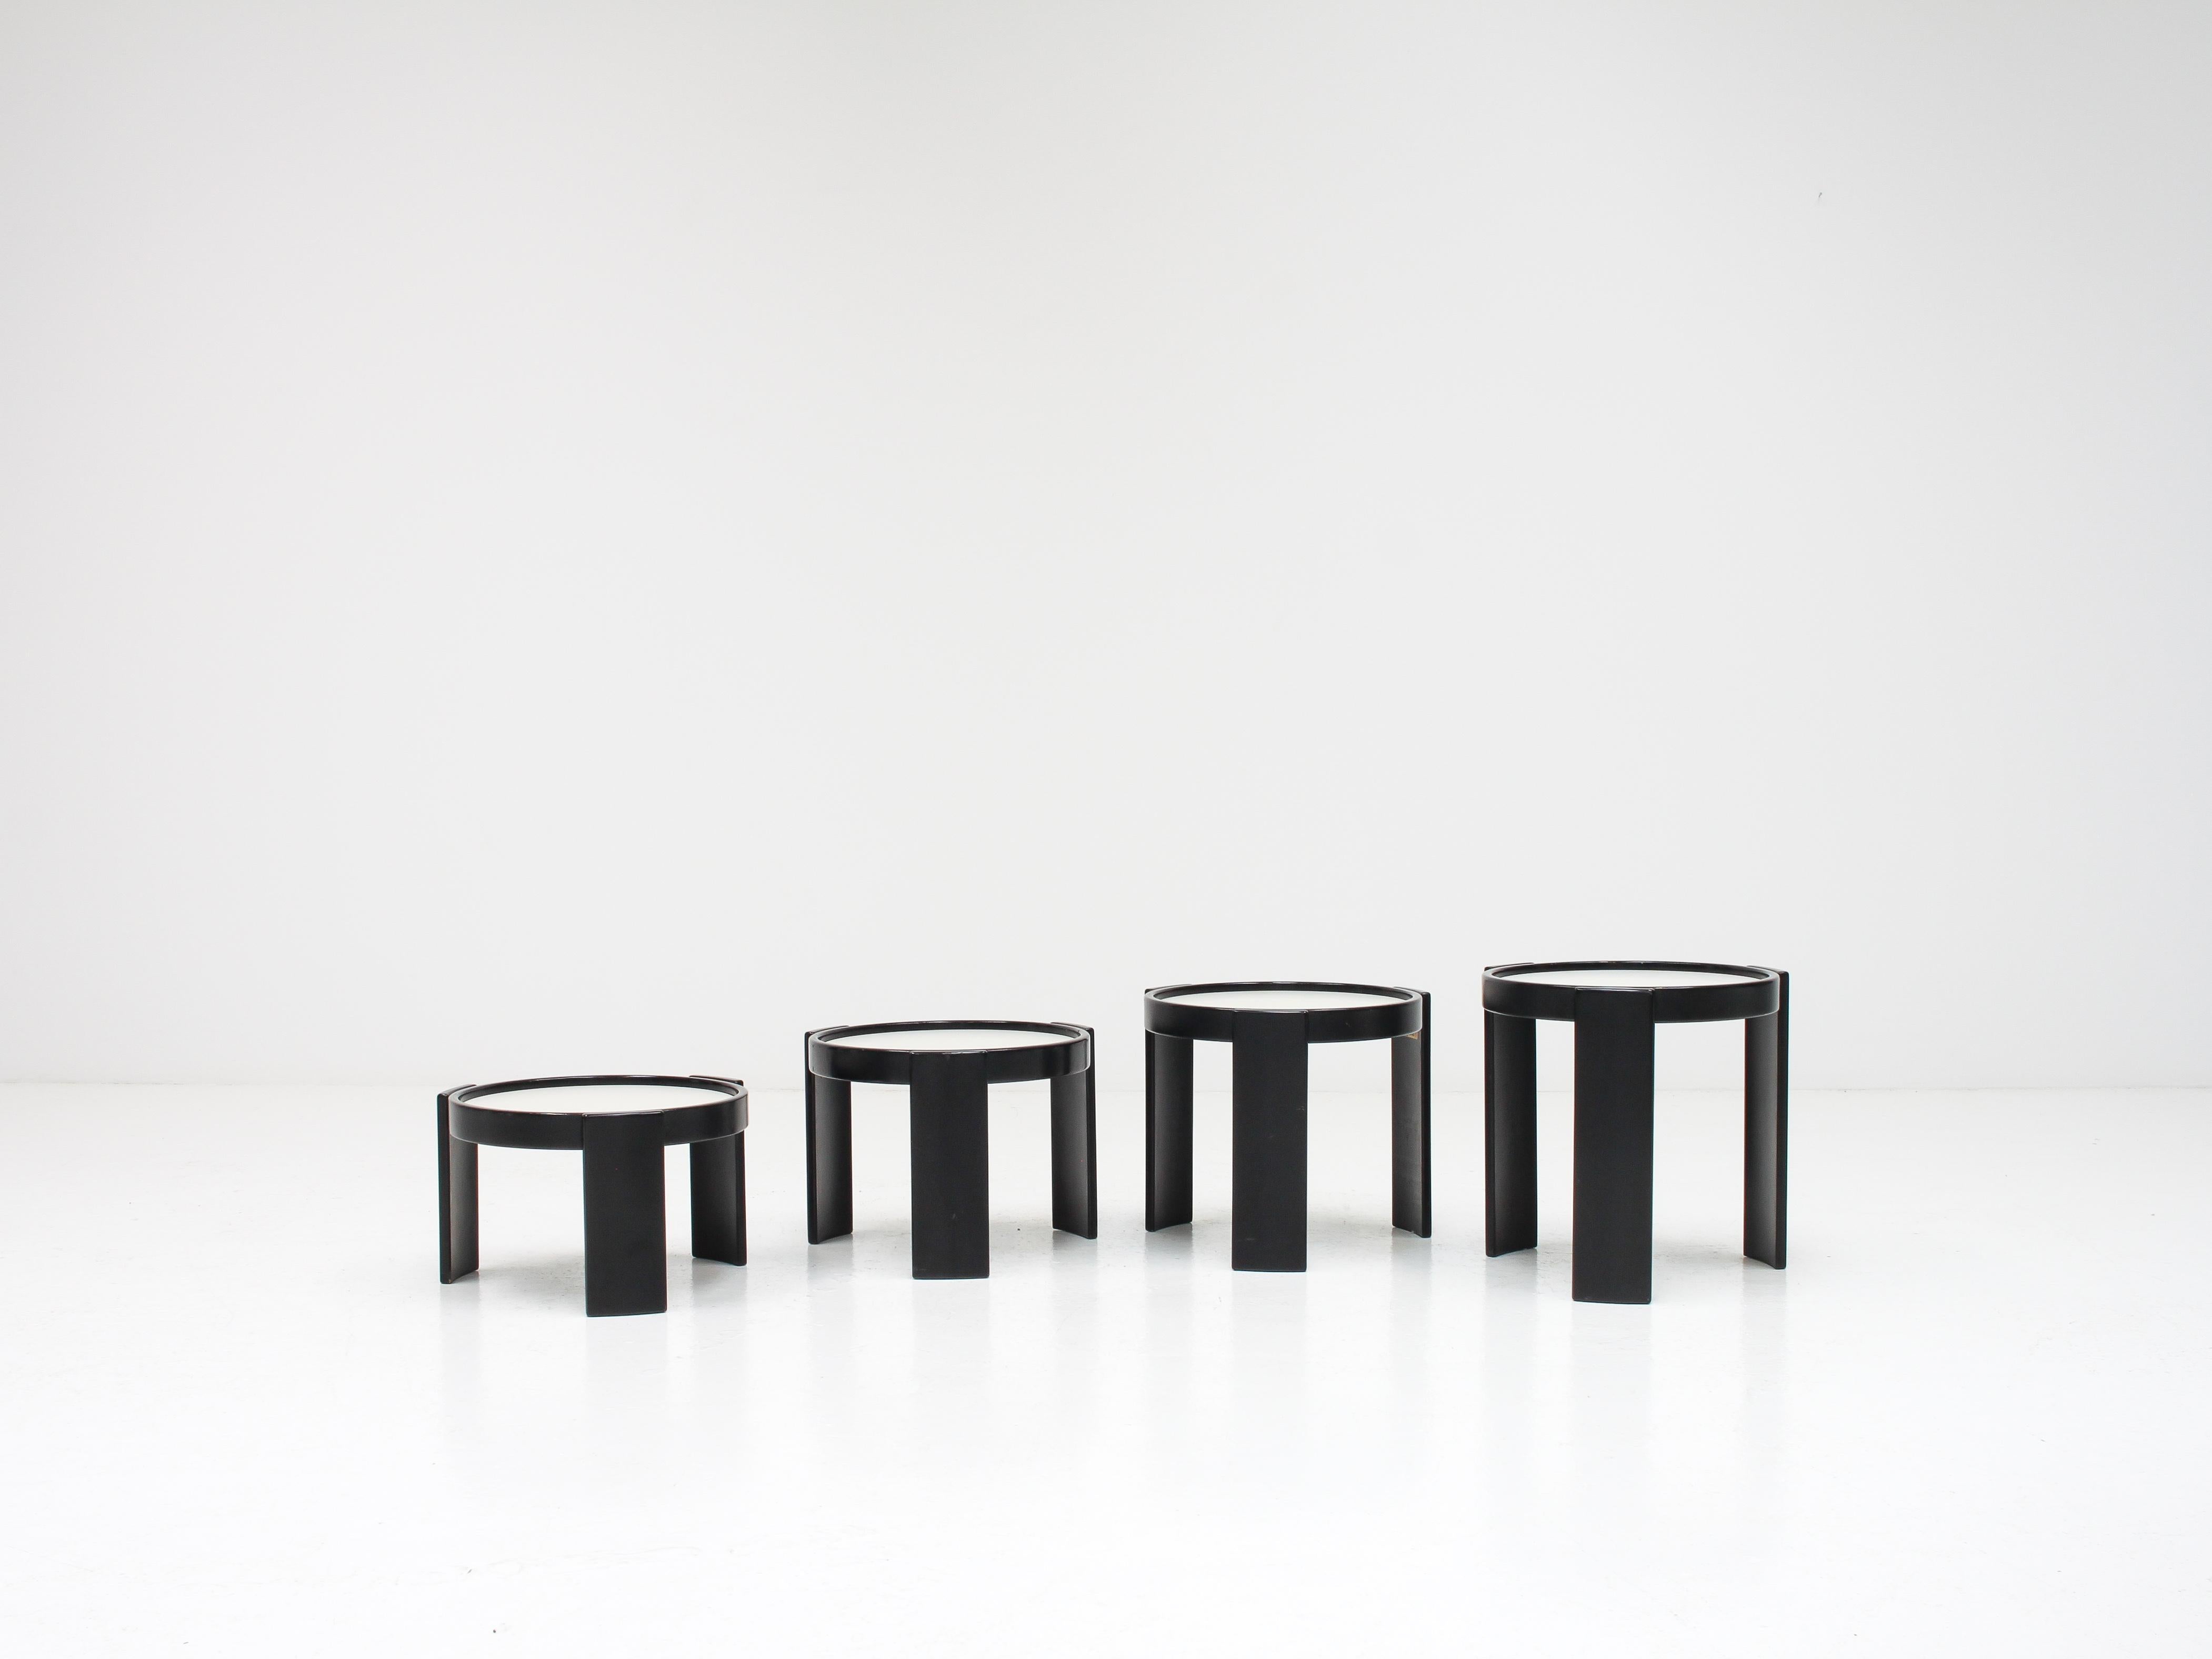 A set of nesting tables designed by Gianfranco Frattini for Cassina Italy and produced in the 1960s.

Consisting of four tables which form a cylinder shape, despite each table having the same circumference they stack perfectly due to the differing